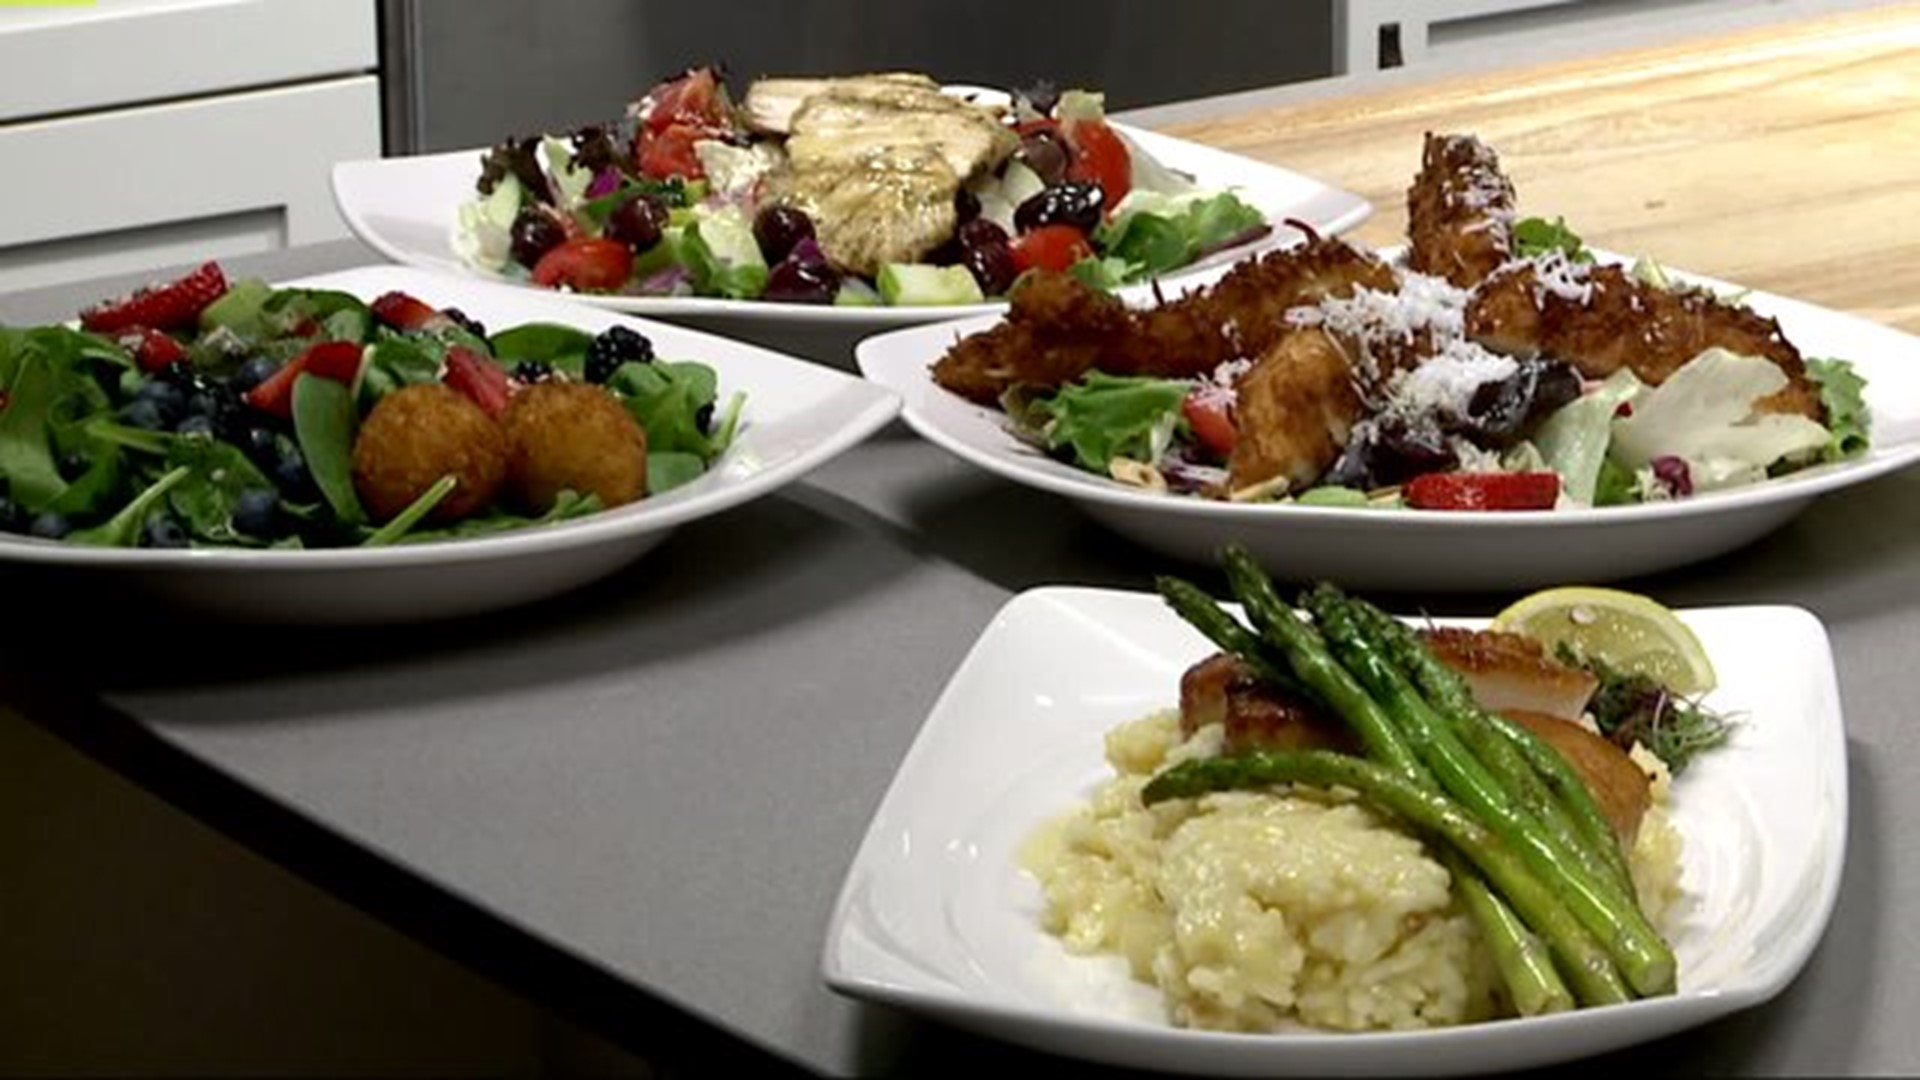 Cafe Magnolia offers fresh food in upscale casual environment